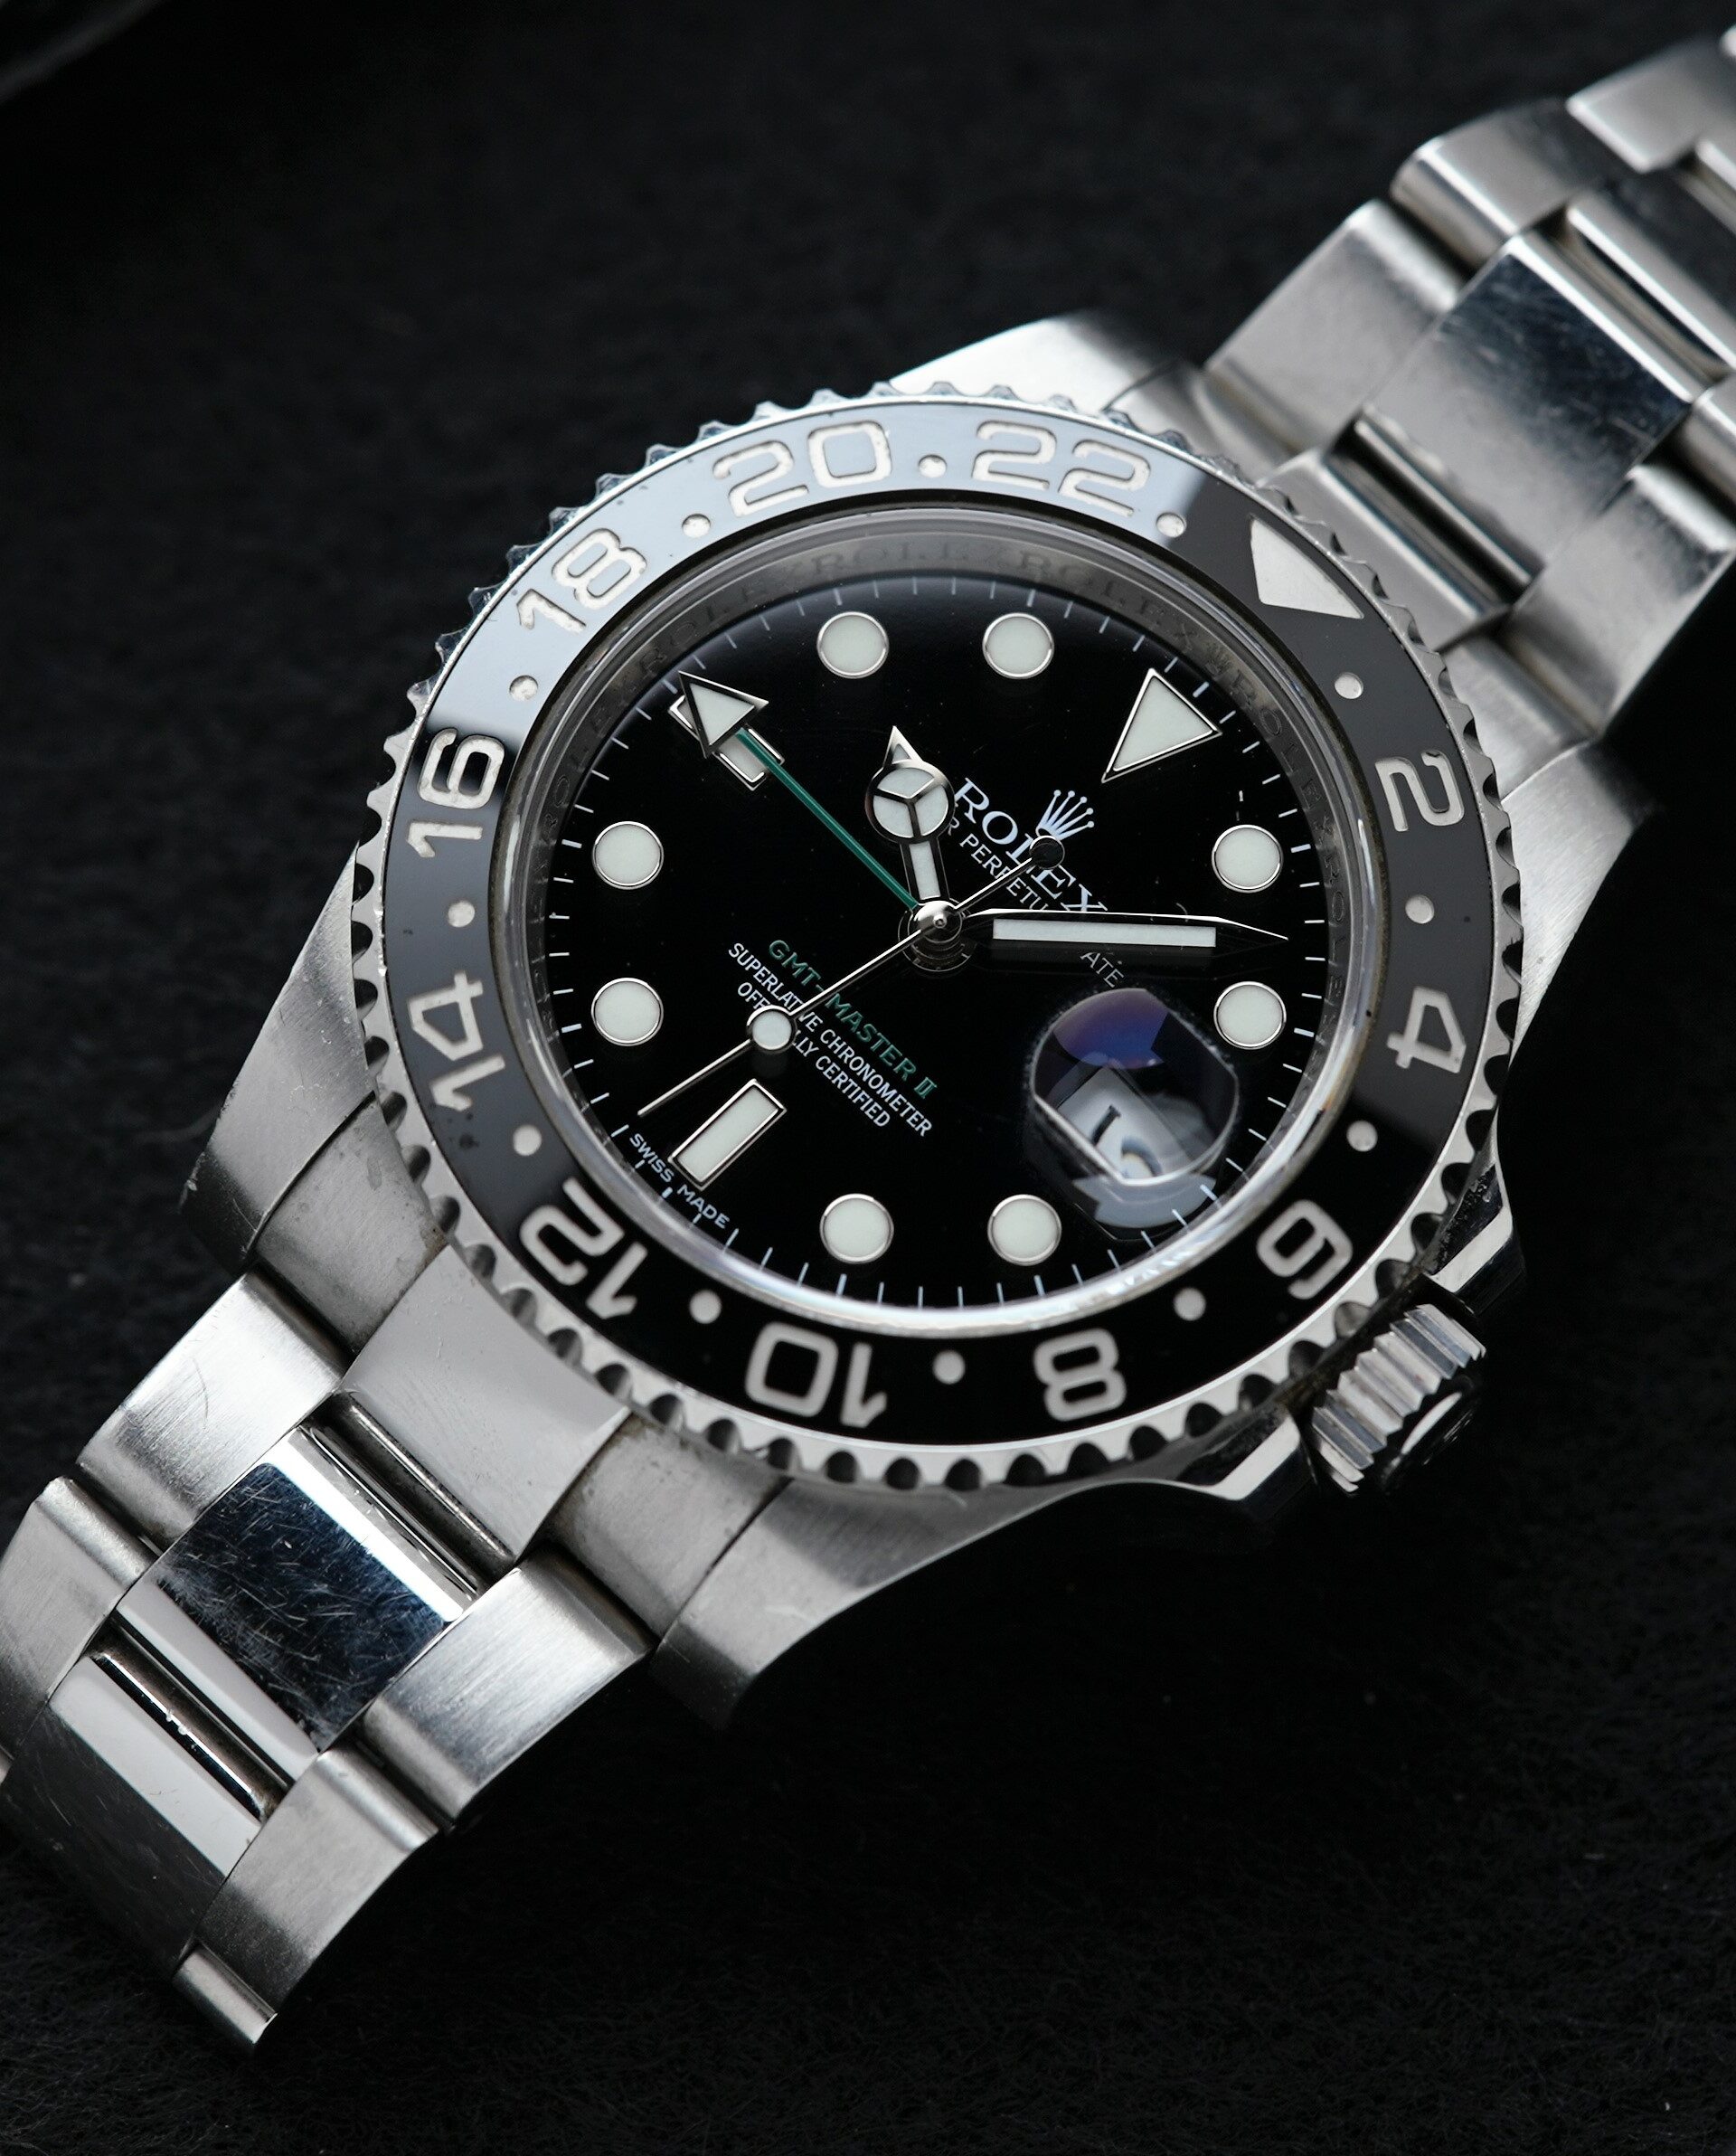 Rolex GMT-Master II Black Discontinued 116710LN wristwatch featured under white lighting on an angle.